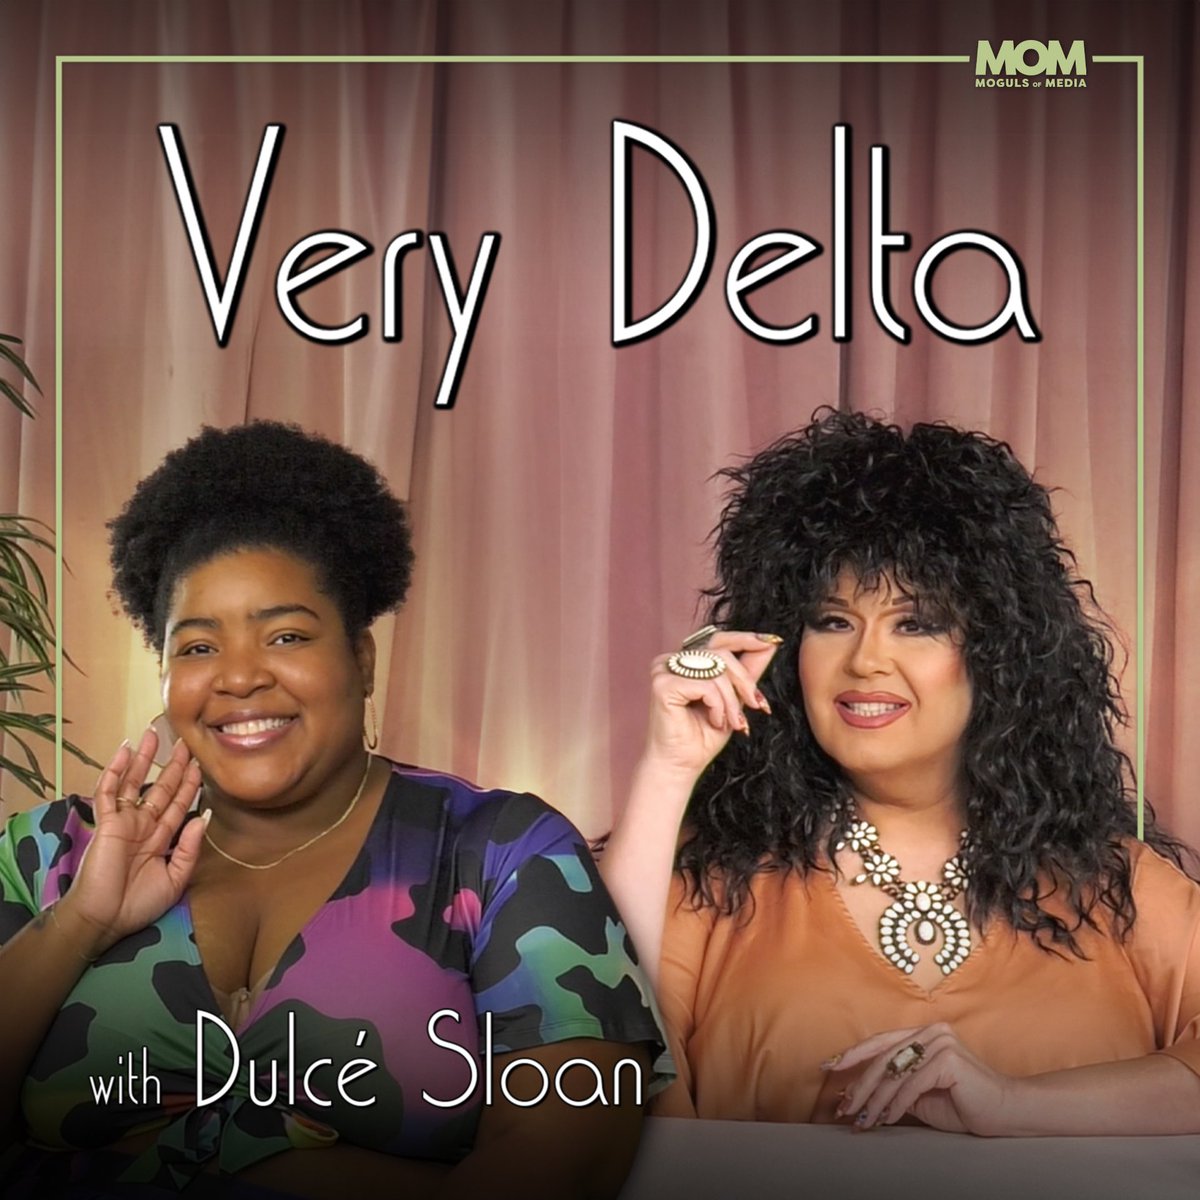 An all new #VeryDelta with the hilarious @dulcesloan is out now! Watch here: youtu.be/fUS_Cpla9YE?si…